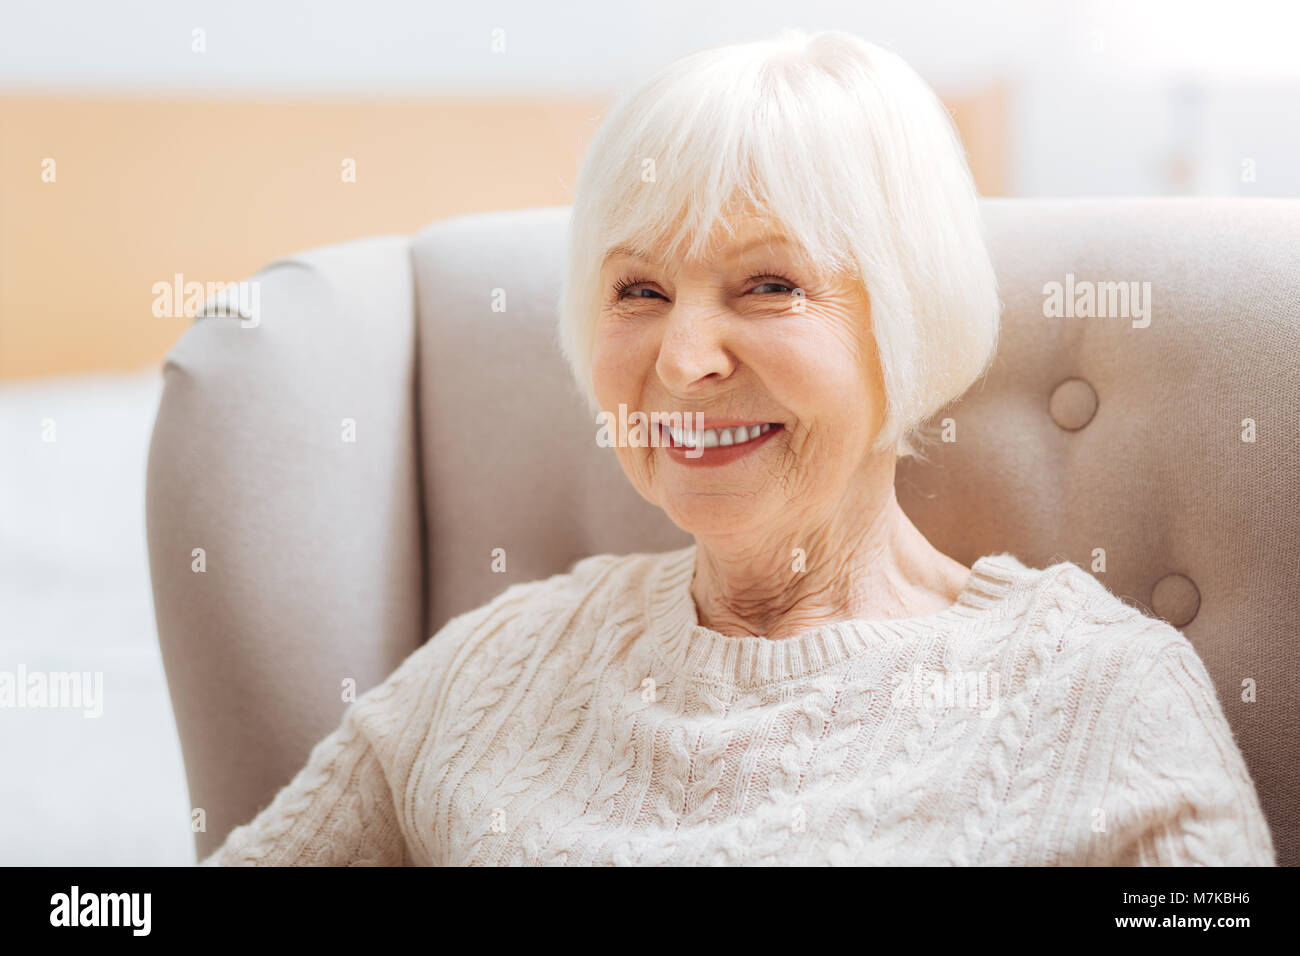 Adorable cute aged woman feeling happy while sitting and smiling Stock Photo